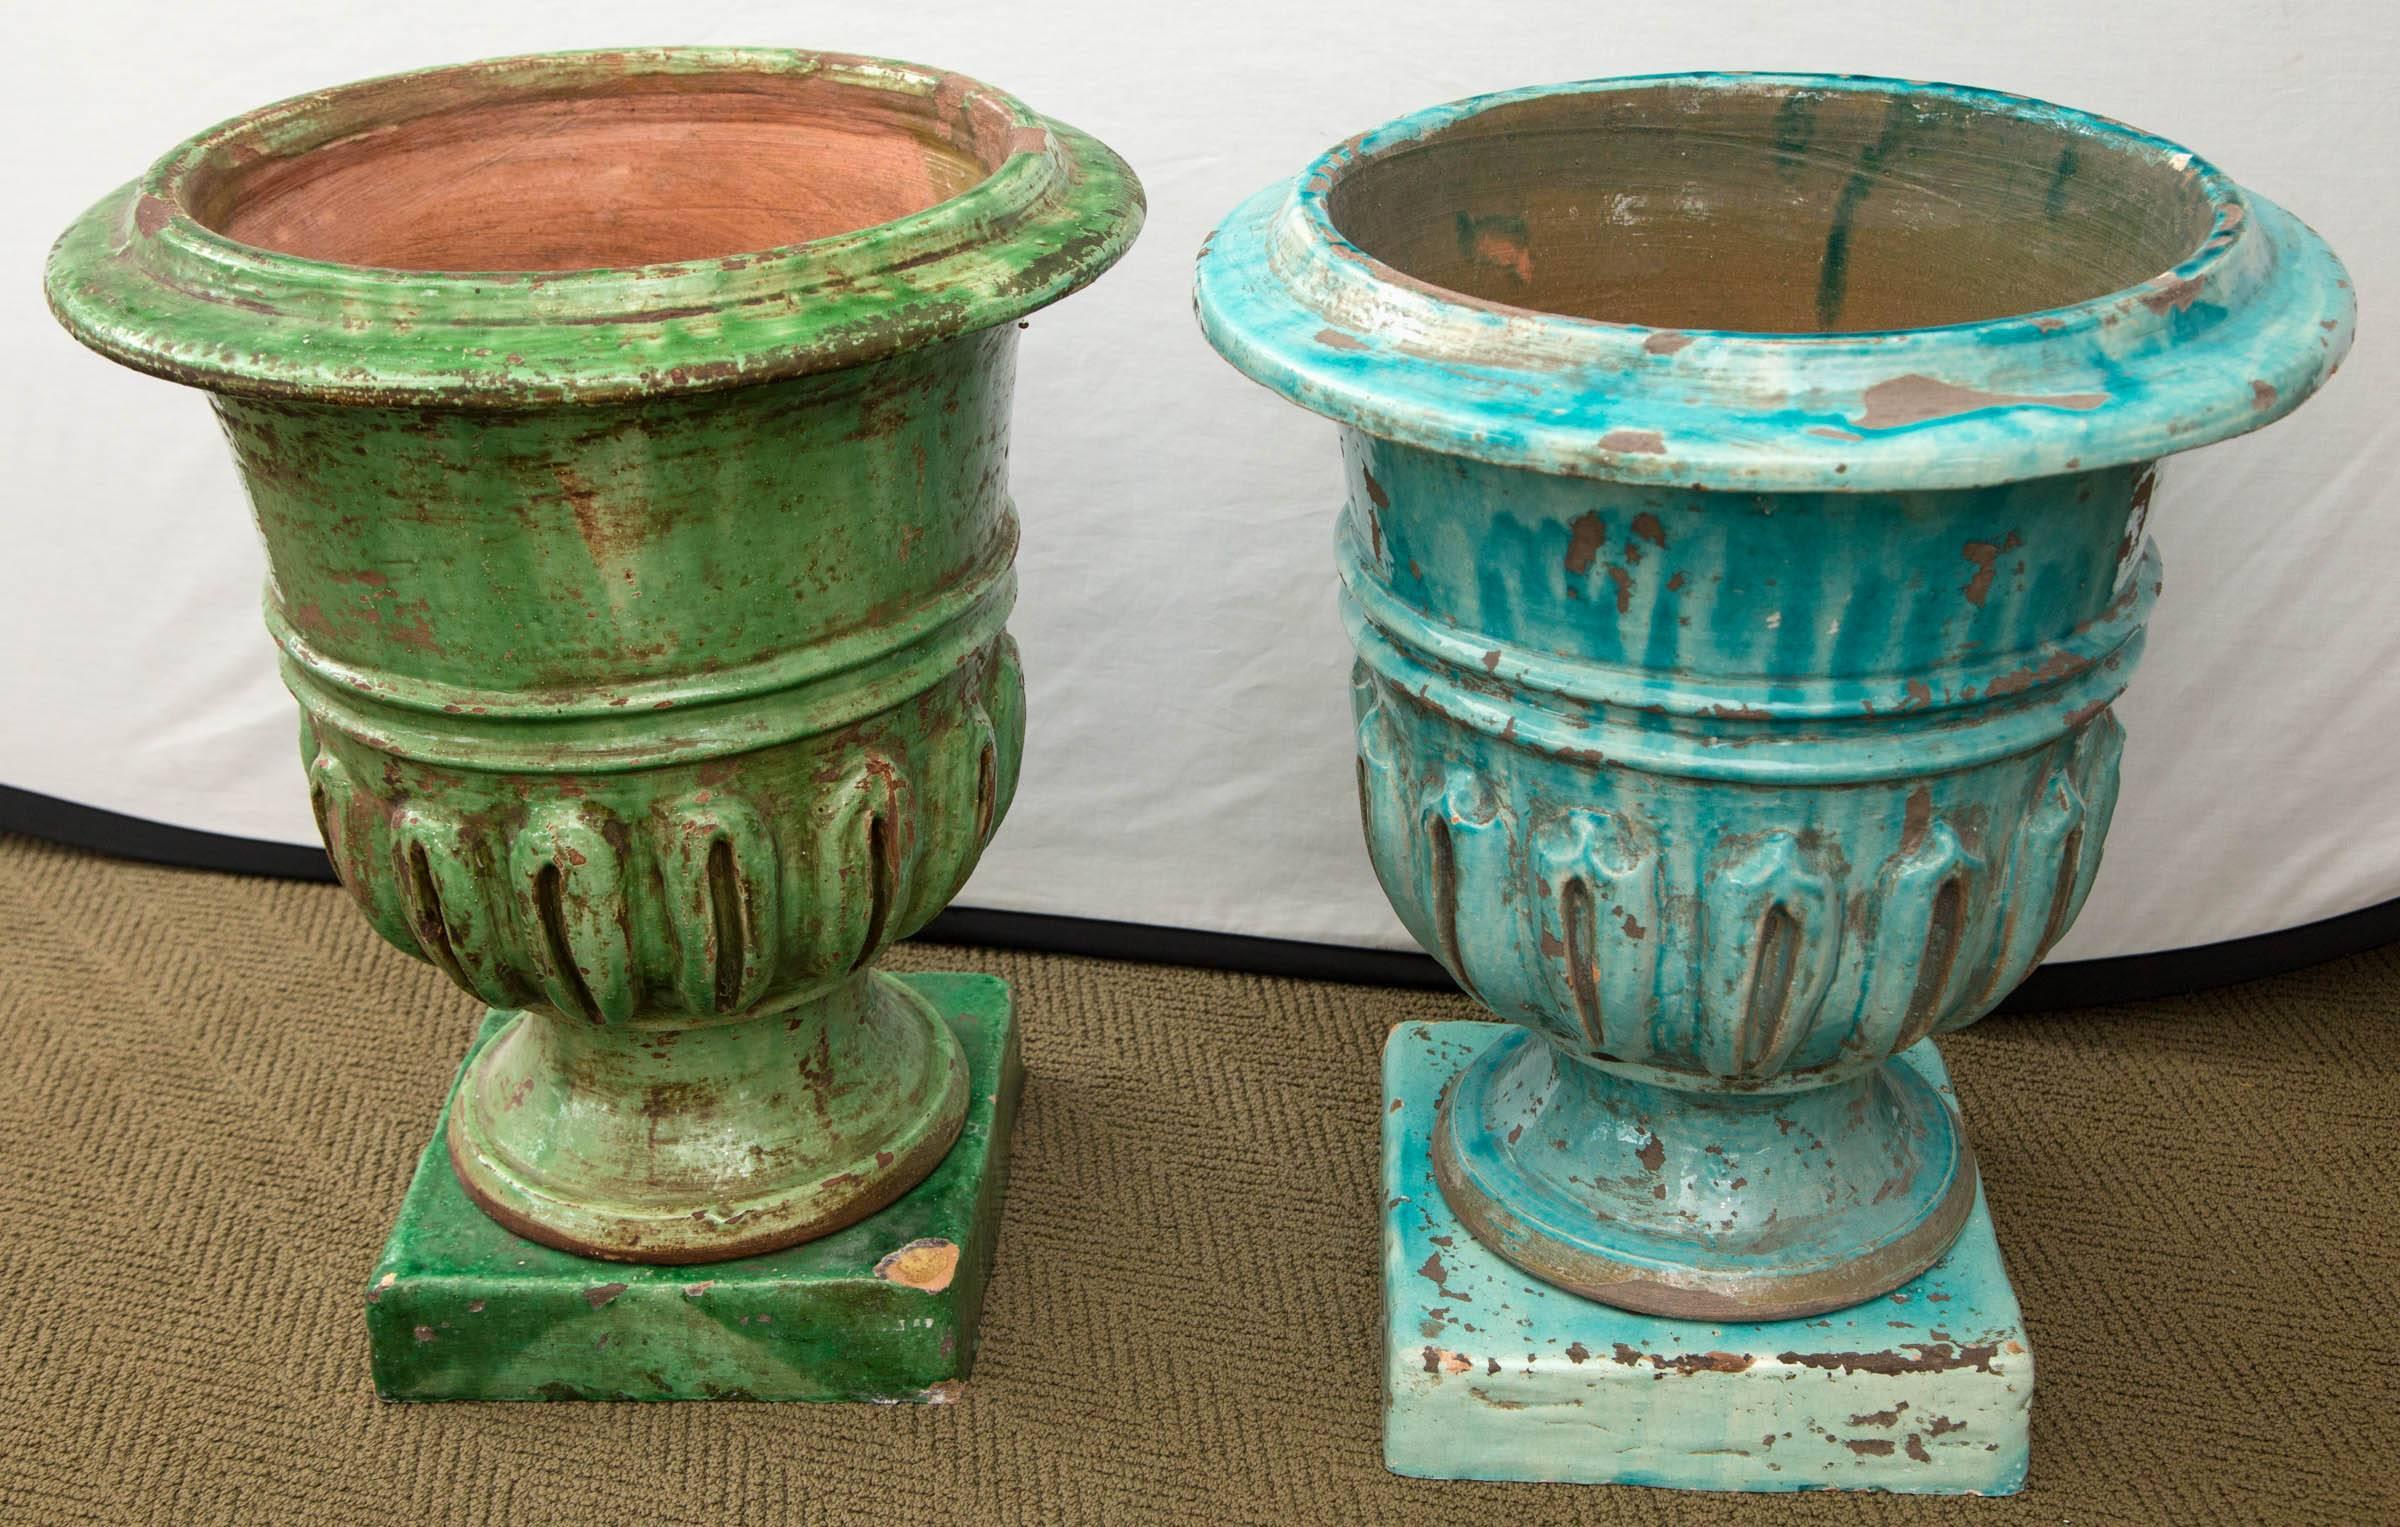 20th Century Pair of Hand-Painted Blue and Green Terracotta Planters